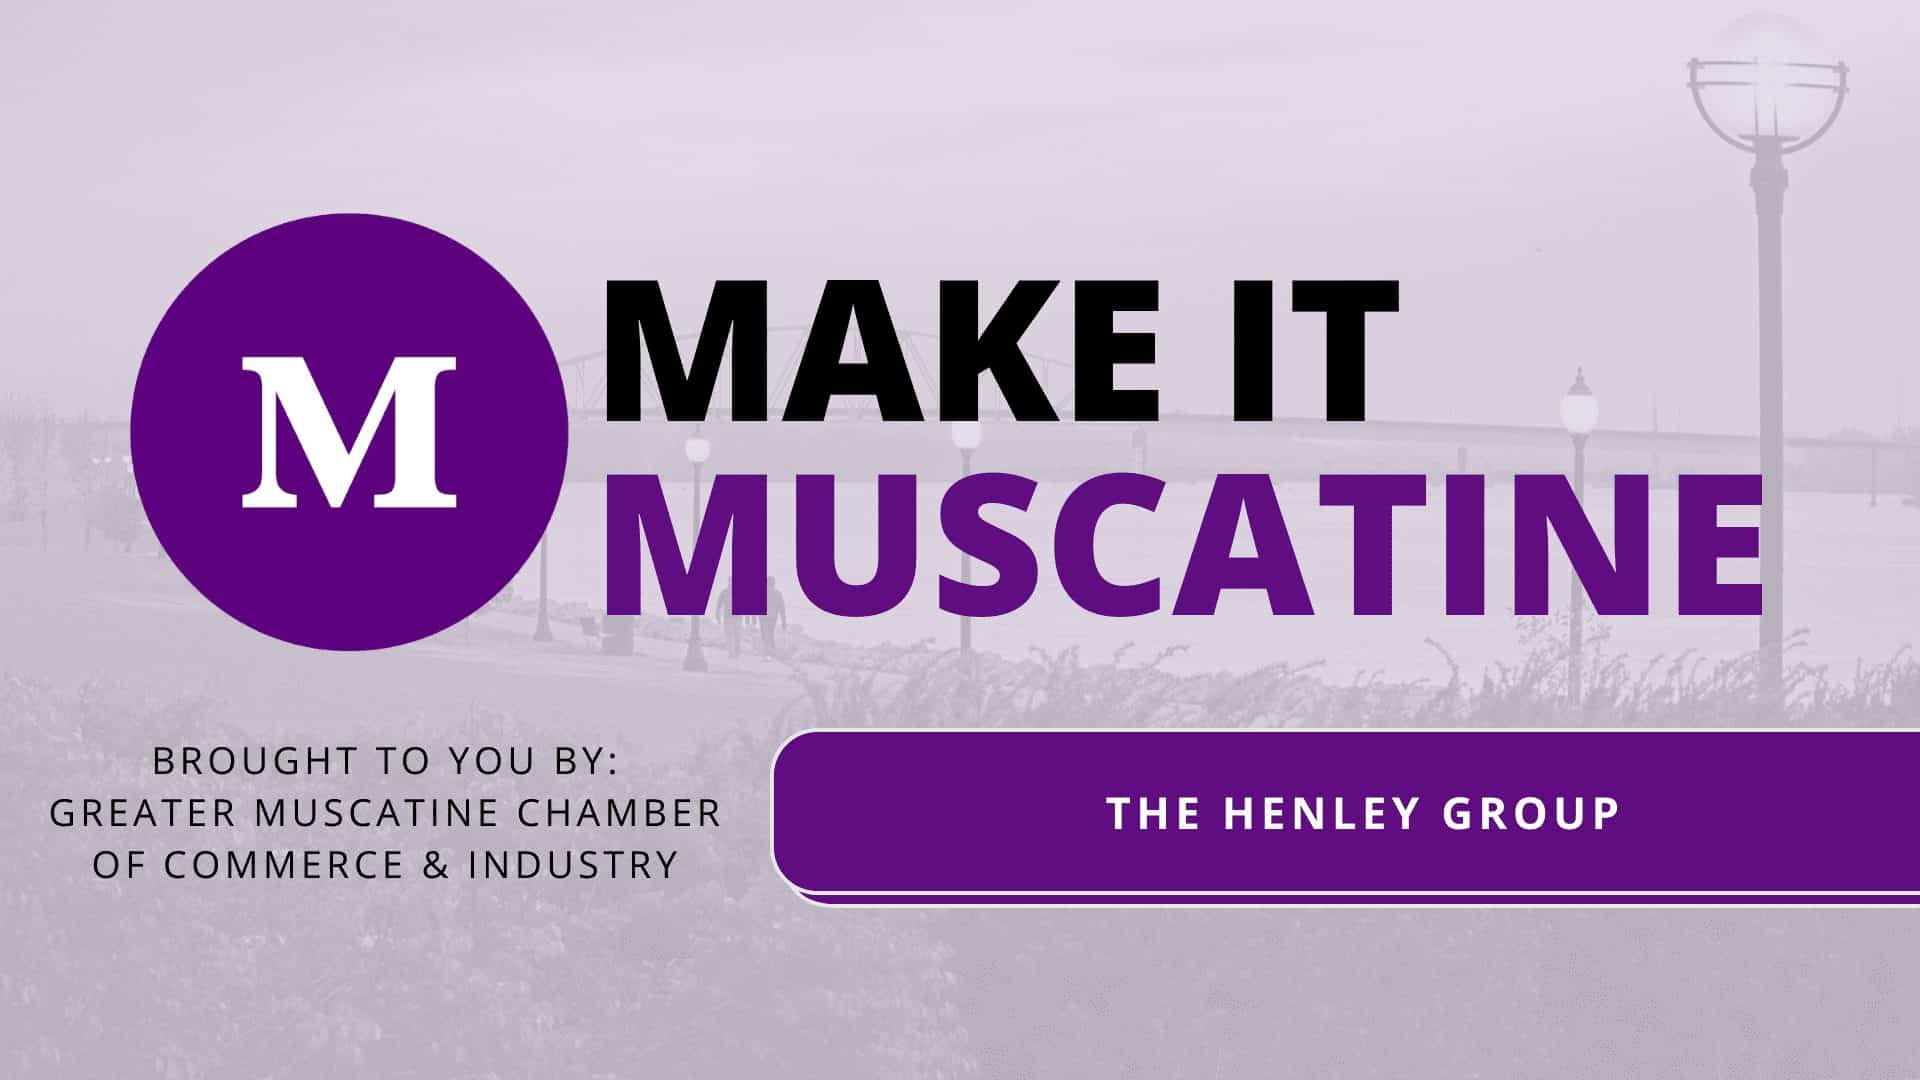 Make it Muscatine: The Henley Group